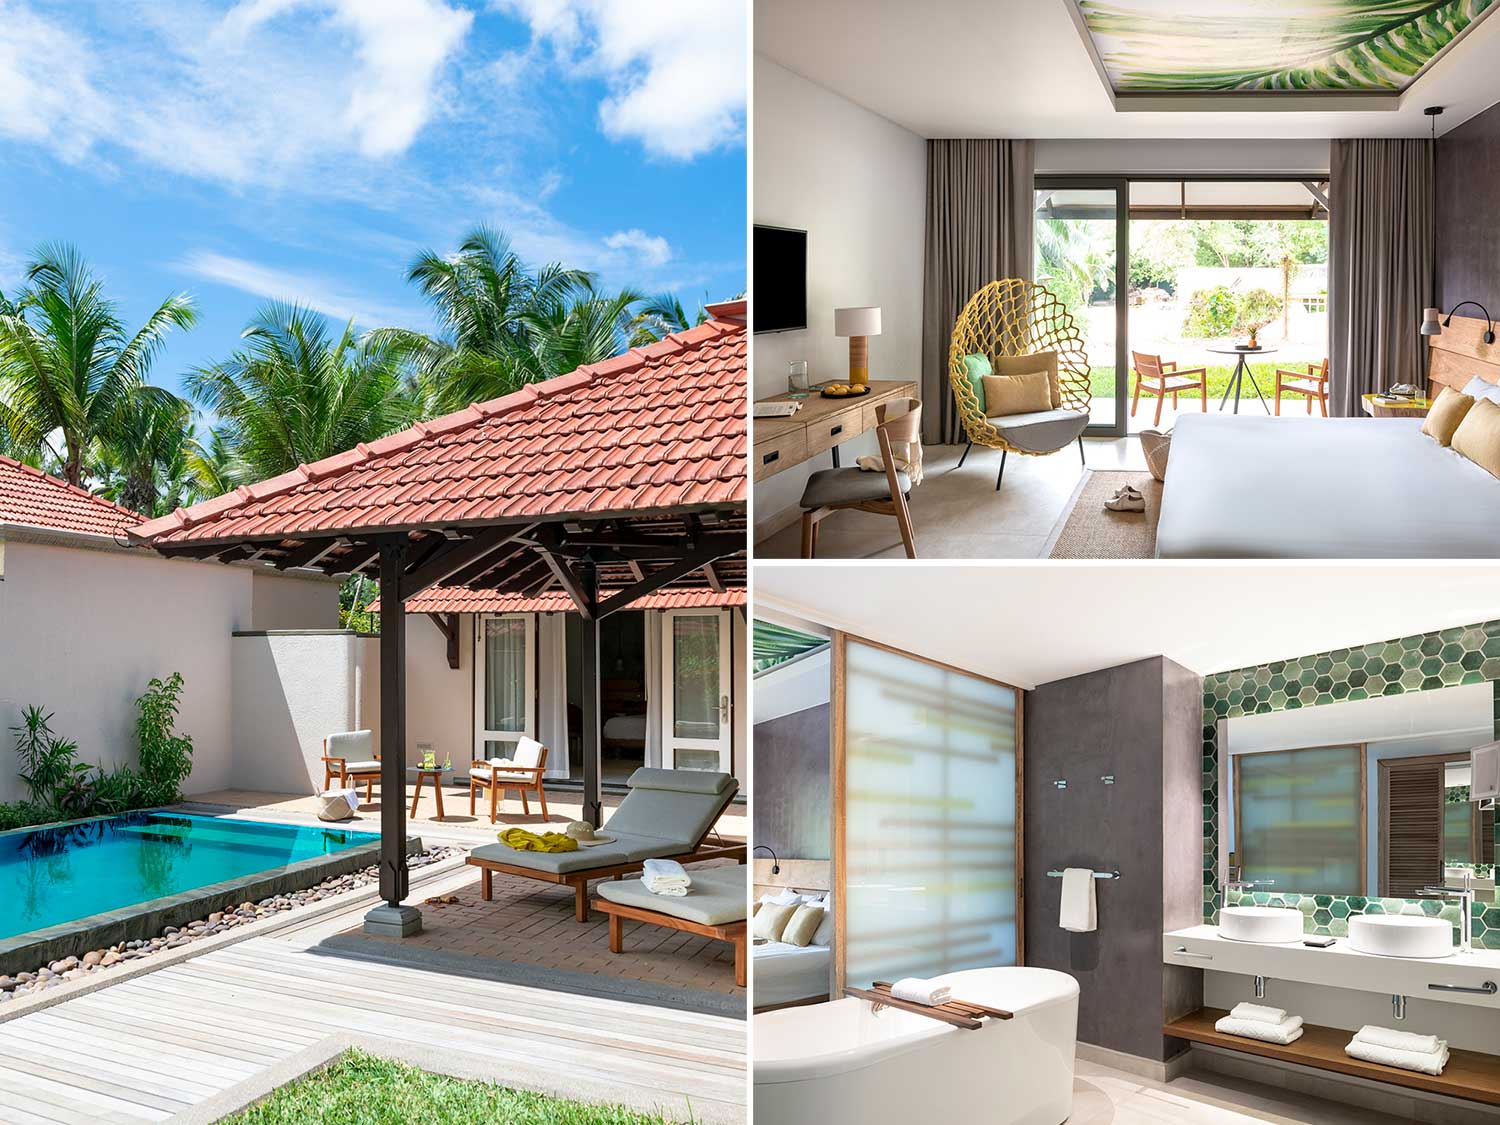 A collage of interior and exterior photos at a Seychelles resort.